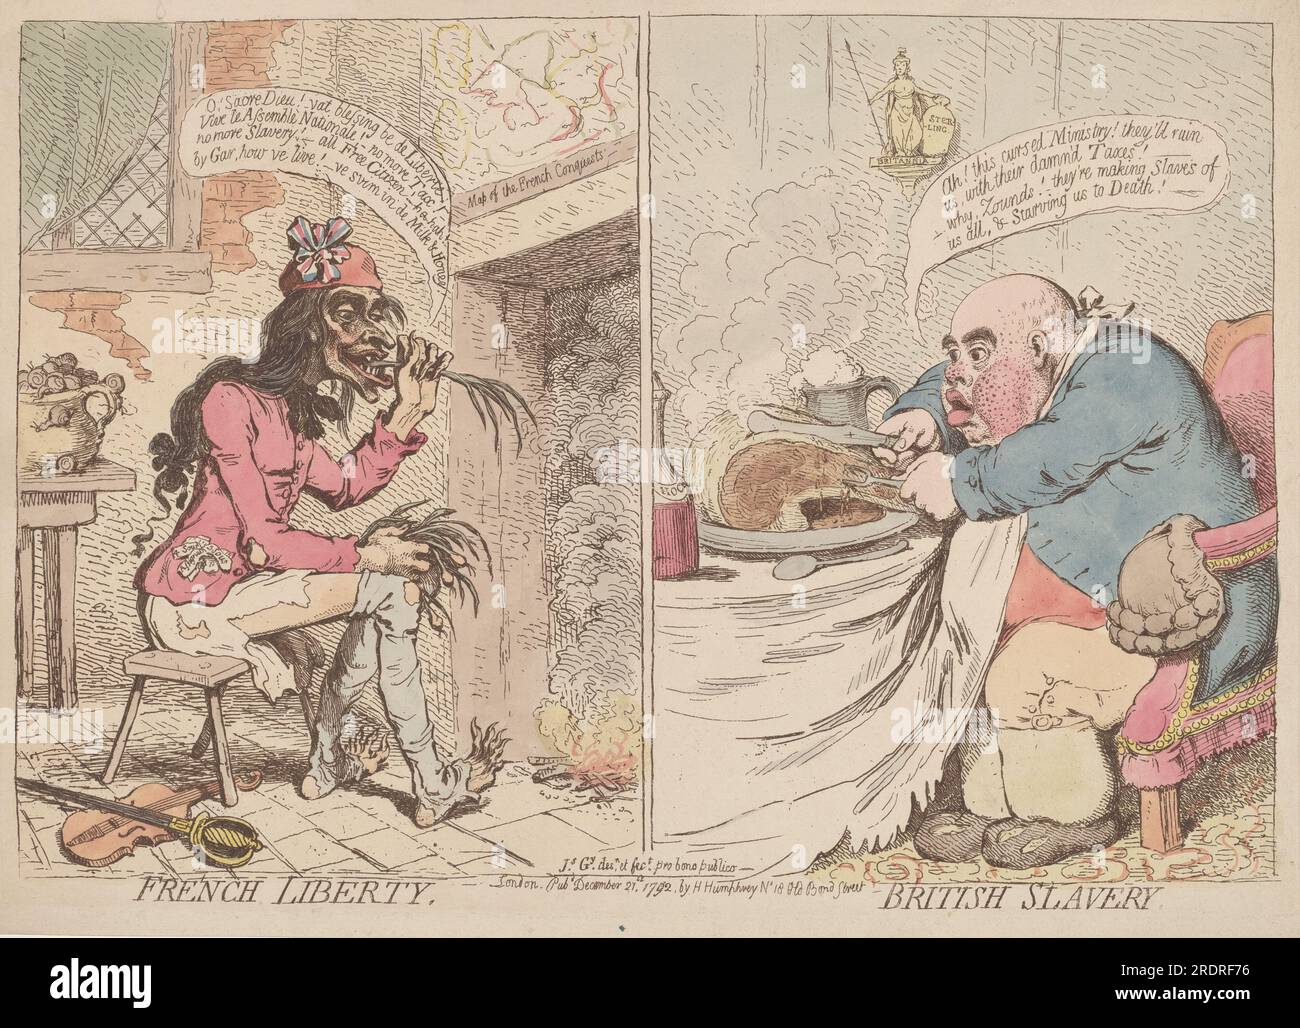 'James Gillray, French Liberty and British Slavery, 1792, etching, hand-colored with watercolor by the publisher, on laid paper, plate: 24.4 x 35.2 cm (9 5/8 x 13 7/8 in.) sheet: 25.9 x 36.2 cm (10 3/16 x 14 1/4 in.), Ailsa Mellon Bruce Fund, 2012.45.2' Stock Photo